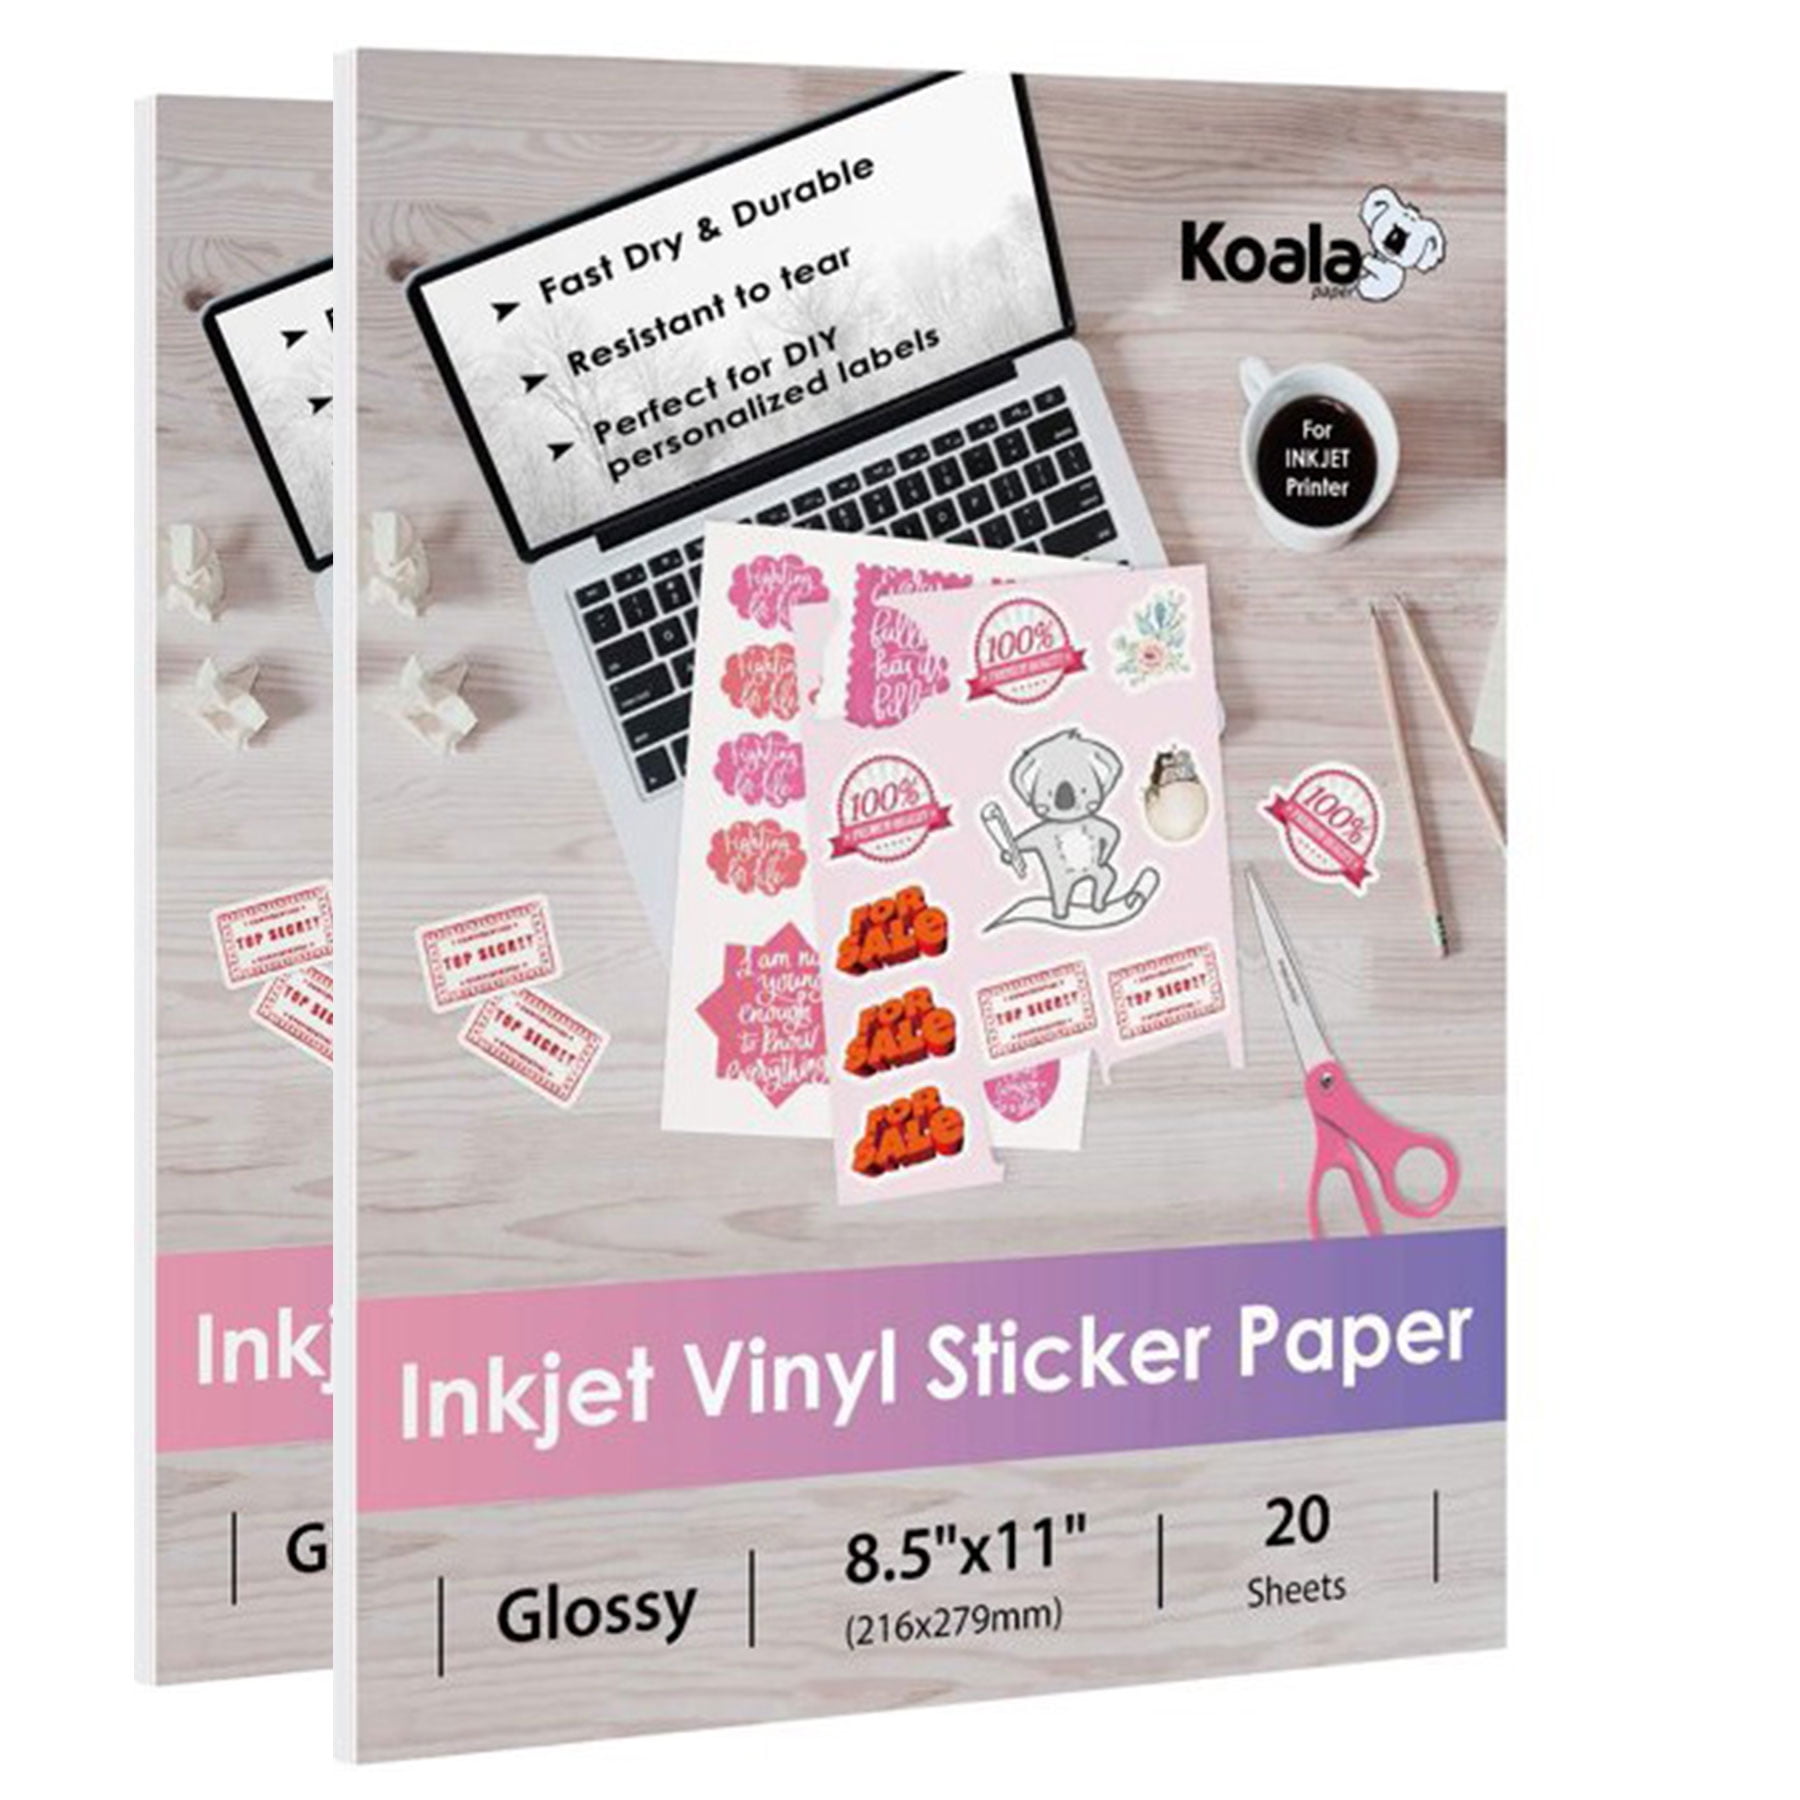 Printable Waterproof Vinyl Sticker Paper for Stickers & Decals - FAST, FREE  SHIPPING!